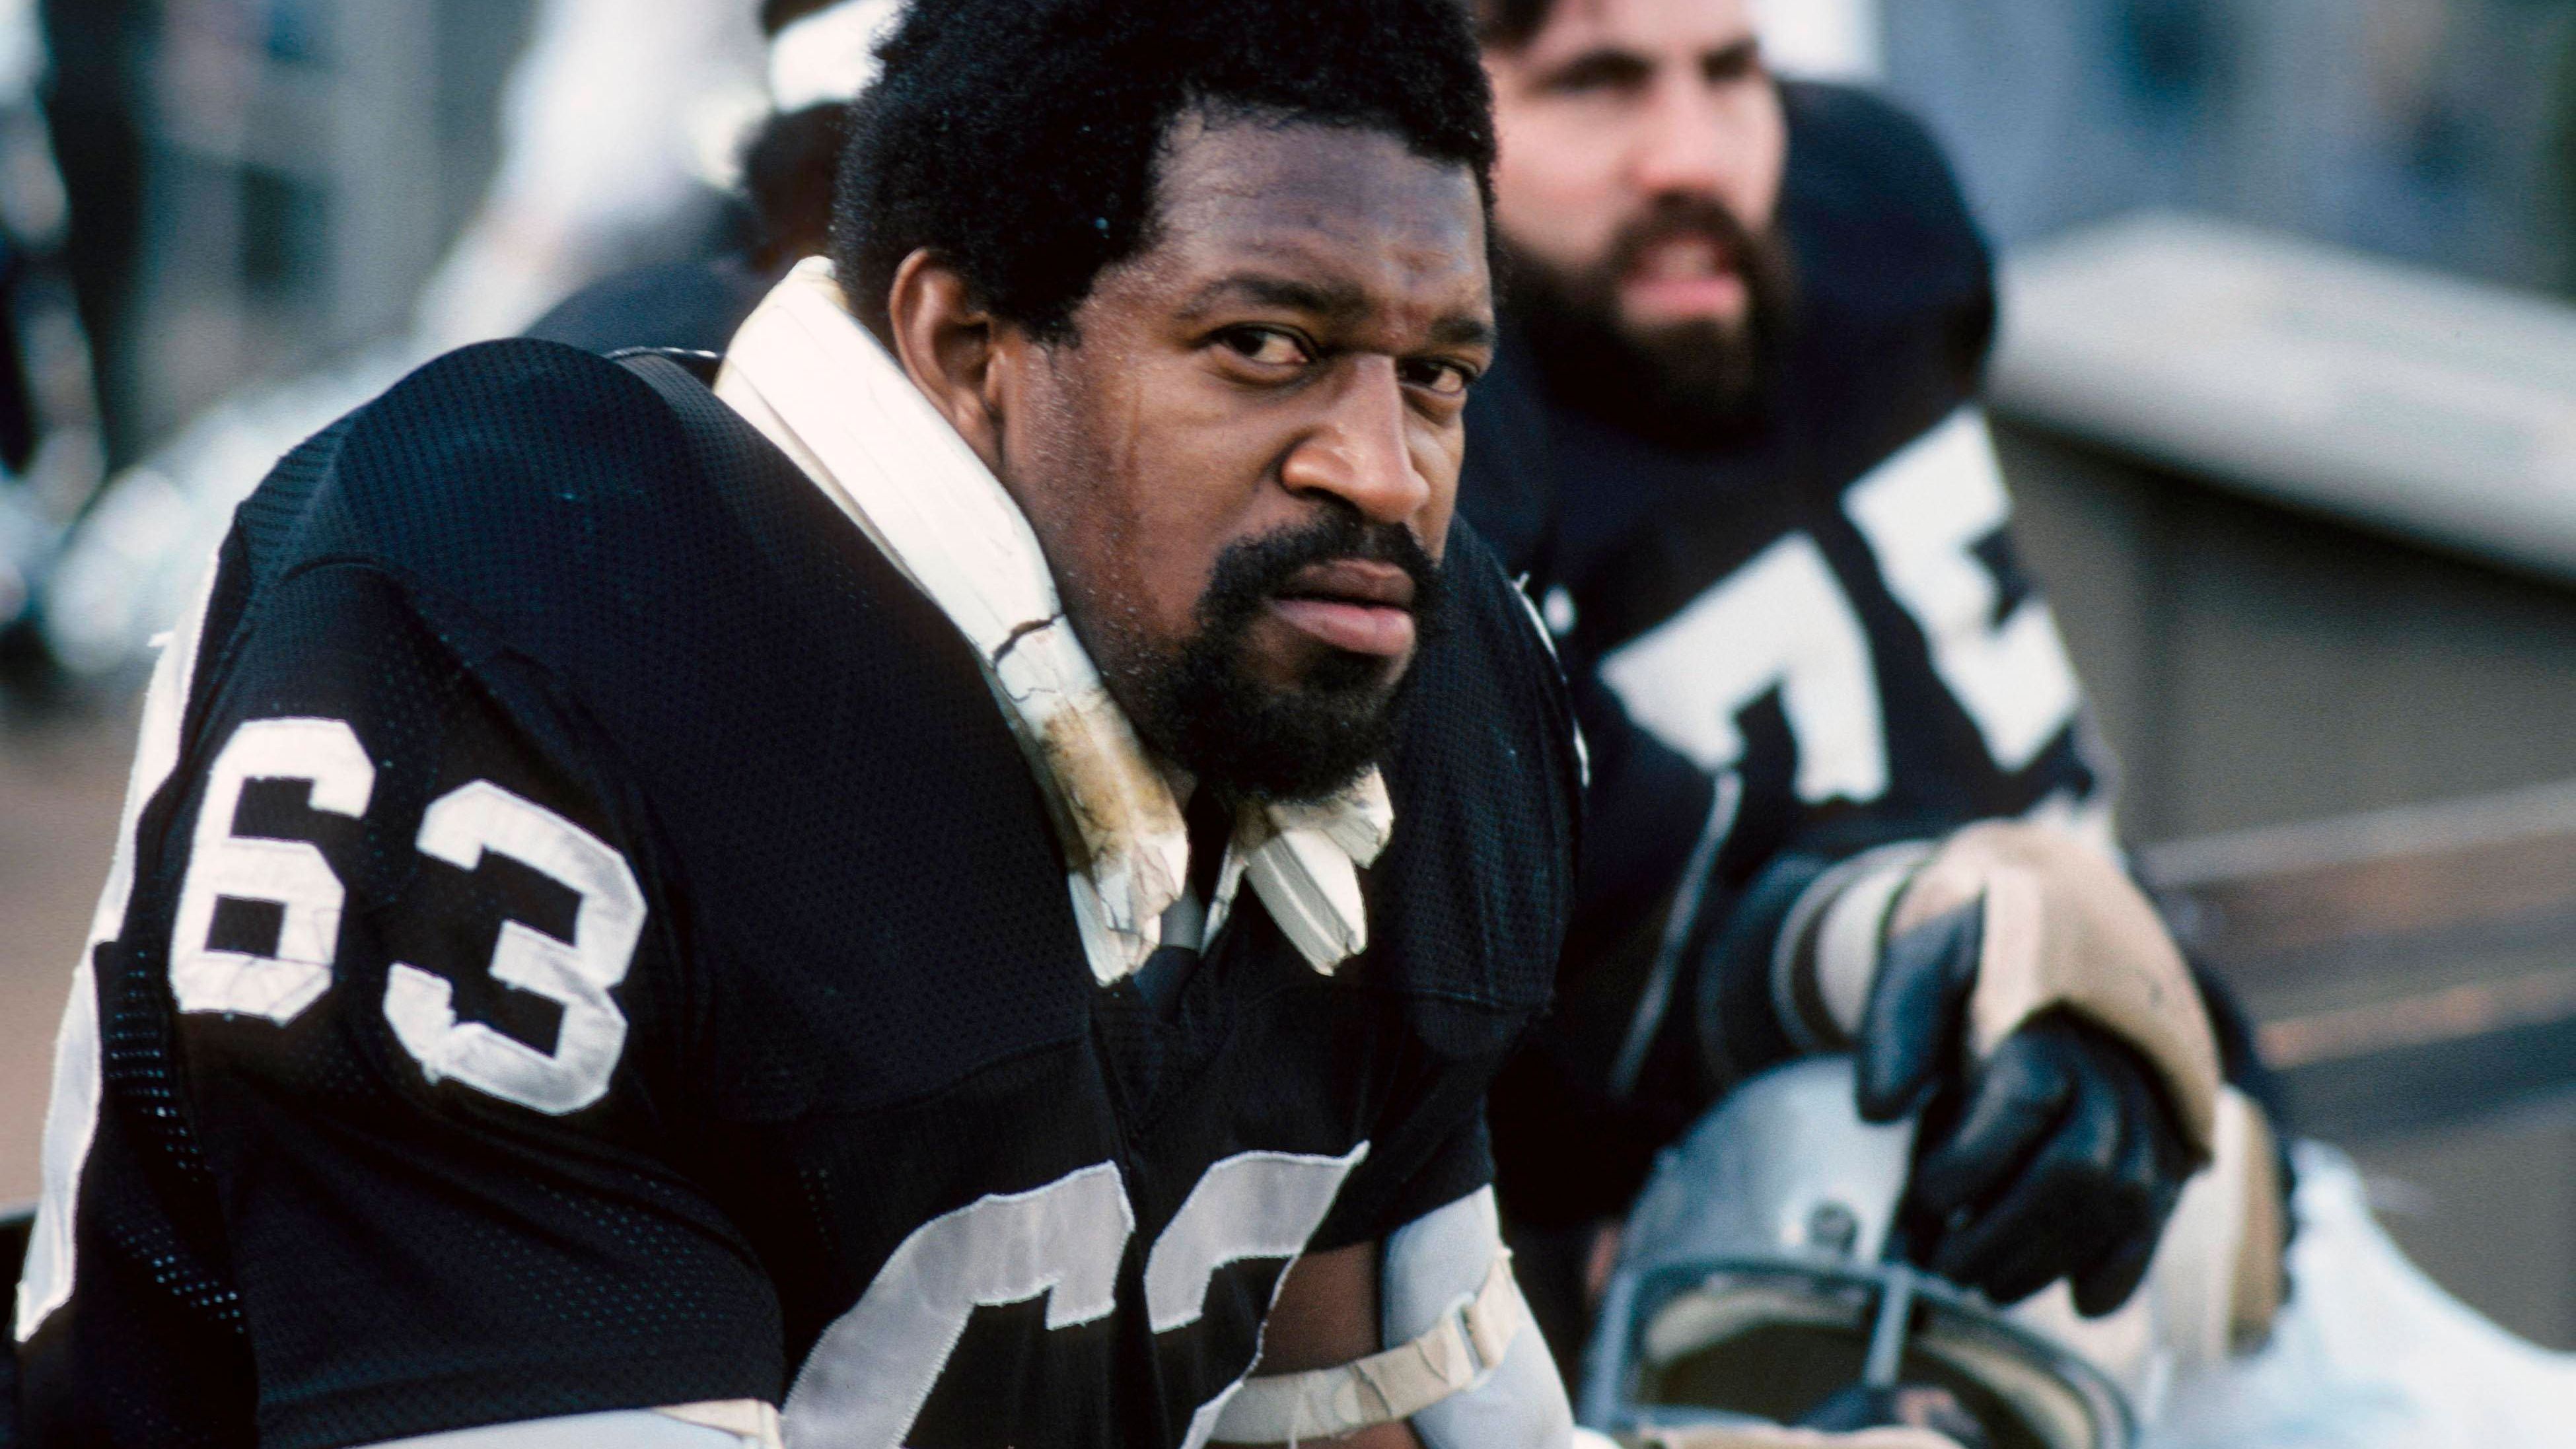 <strong>63: Gene Upshaw</strong><br>Team: Oakland Raiders<br>Position: Offensive Guard<br>Erfolge: Pro Football Hall of Famer, zweimaliger Super-Bowl-Champion, fünfmaliger First Team All-Pro, siebenmaliger Pro Bowler<br>Honorable Mention: Willie Lanier